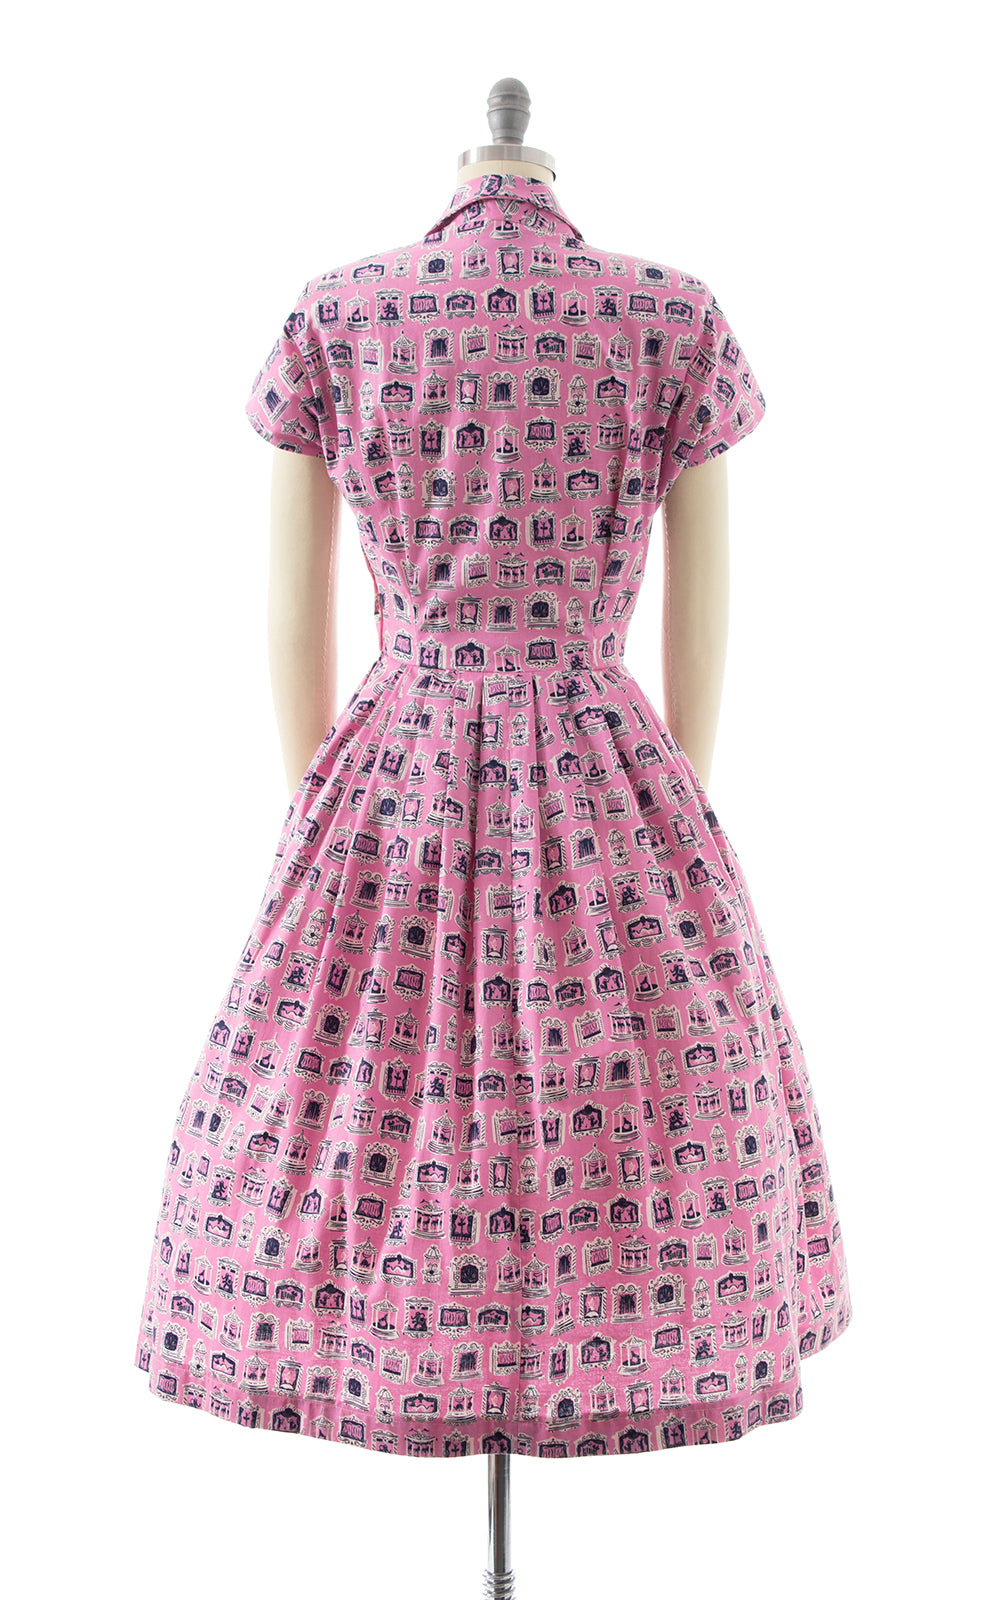 Modern VIVIEN OF HOLLOWAY 1950s Style Circus Novelty Print Dress with Pockets | small